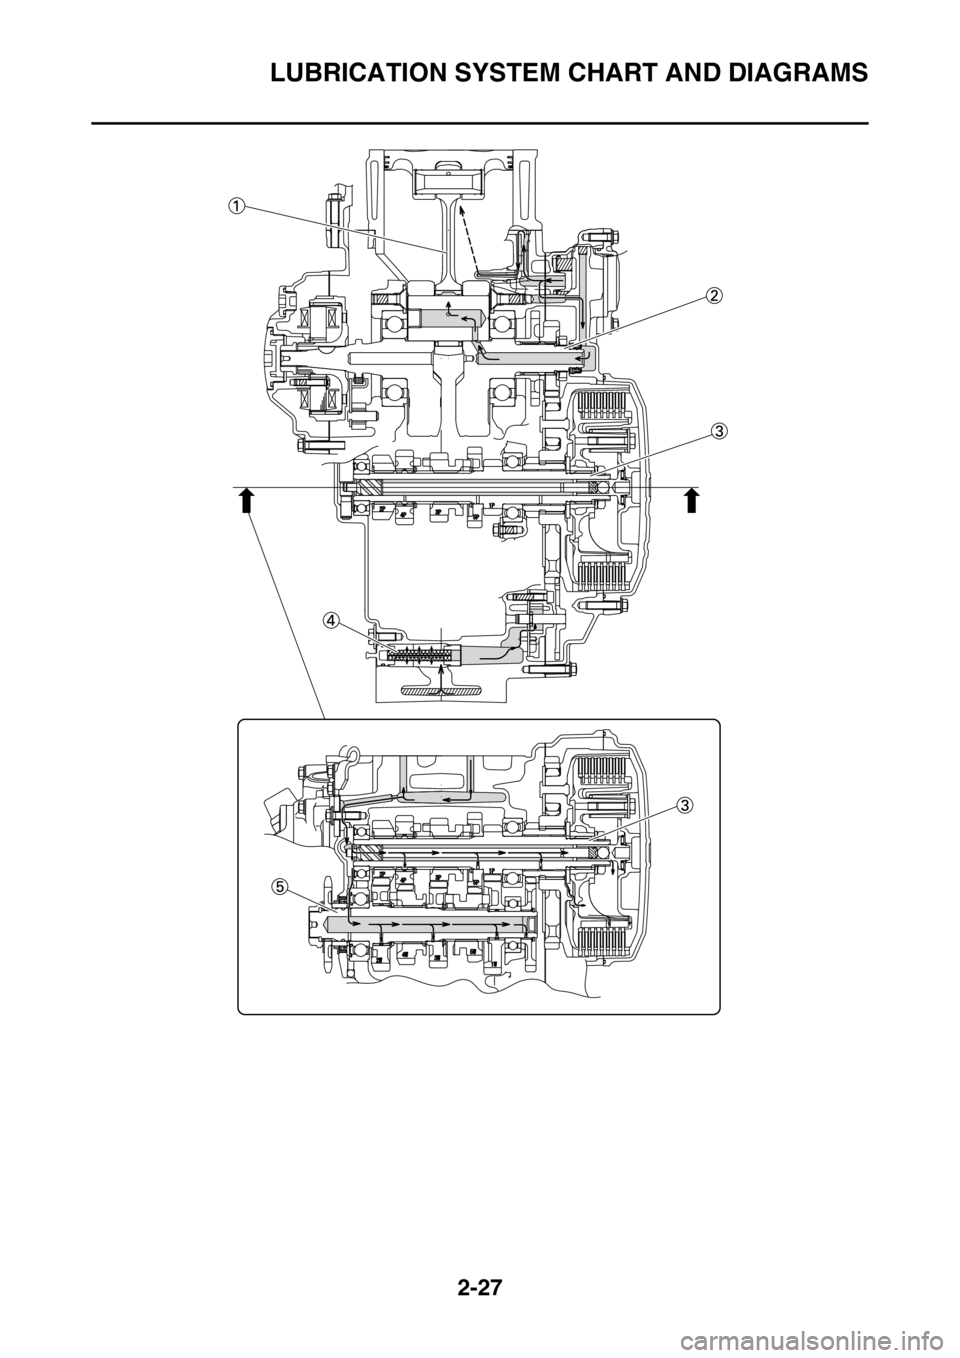 YAMAHA WR 450F 2016  Owners Manual LUBRICATION SYSTEM CHART AND DIAGRAMS
2-27 